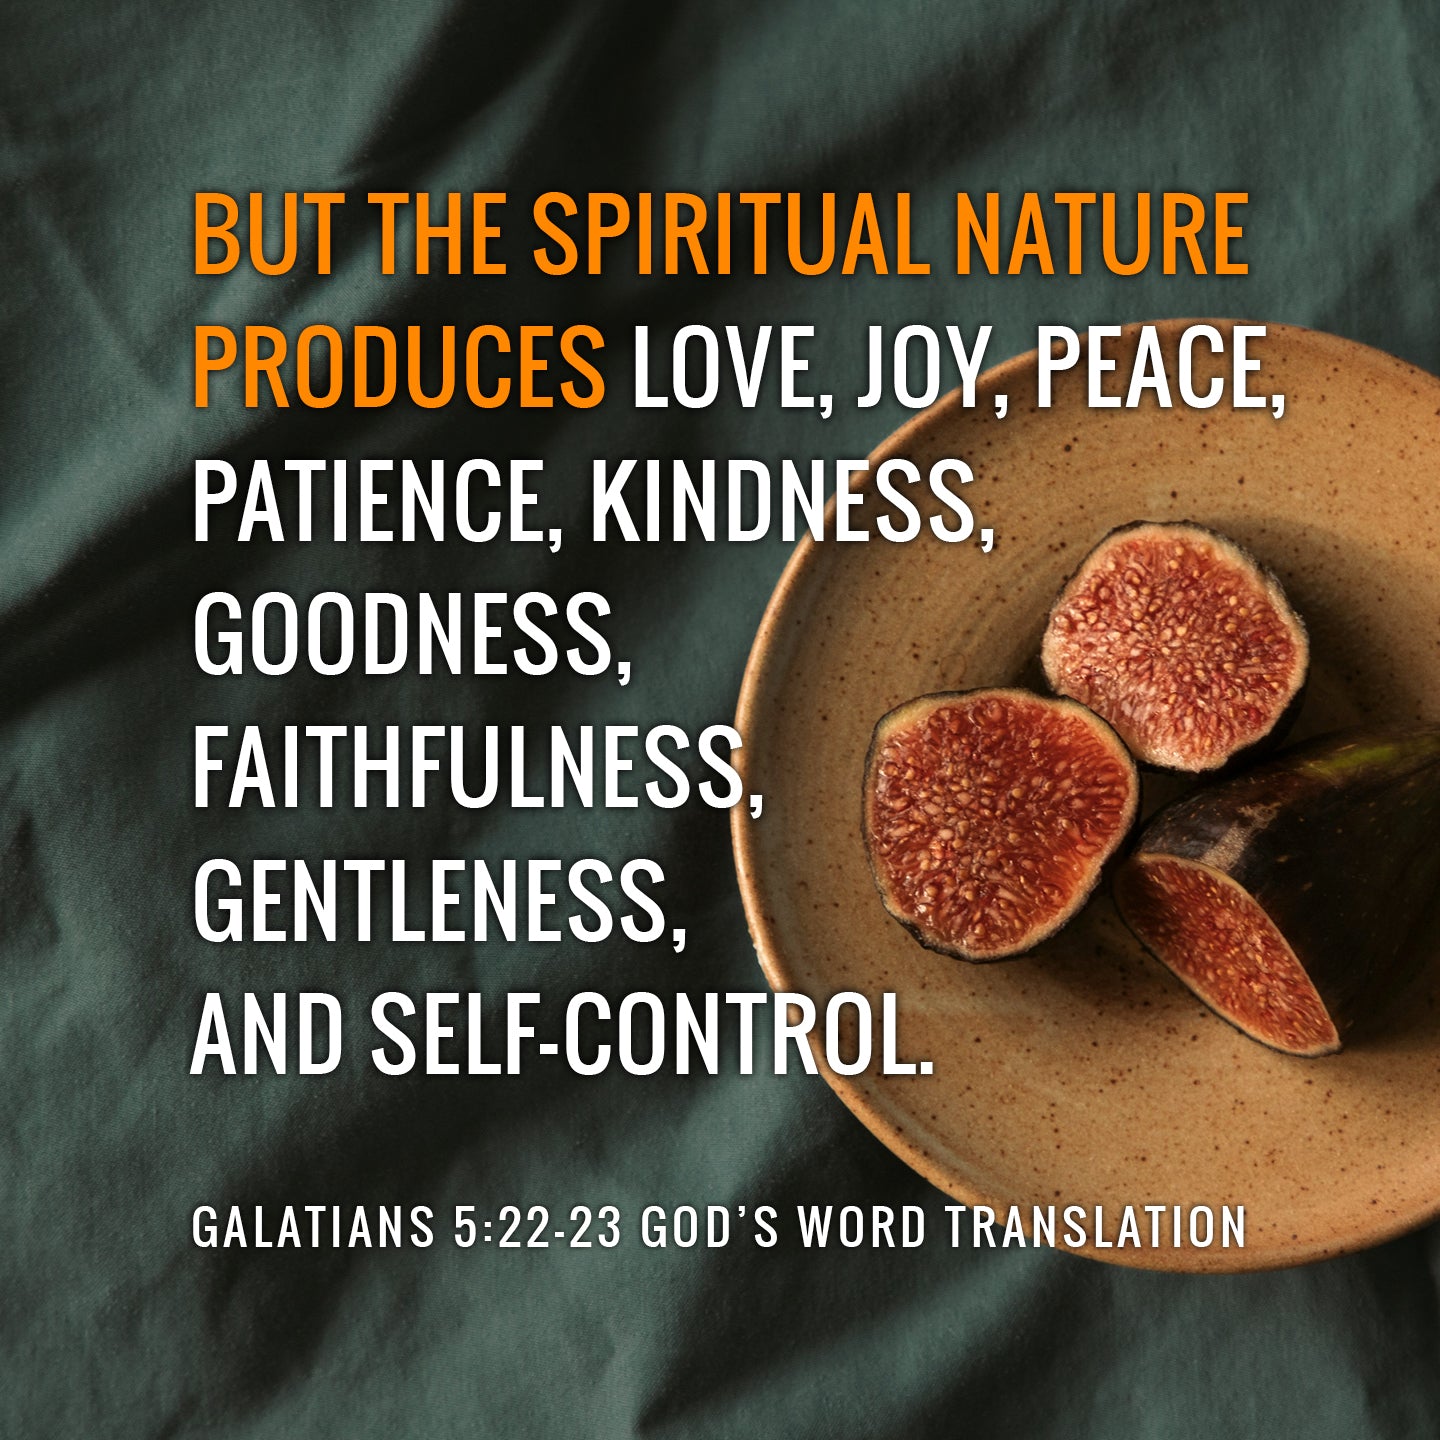 Galatians 5:22 But the fruit of the Spirit is love, joy, peace, patience,  kindness, goodness, faithfulness